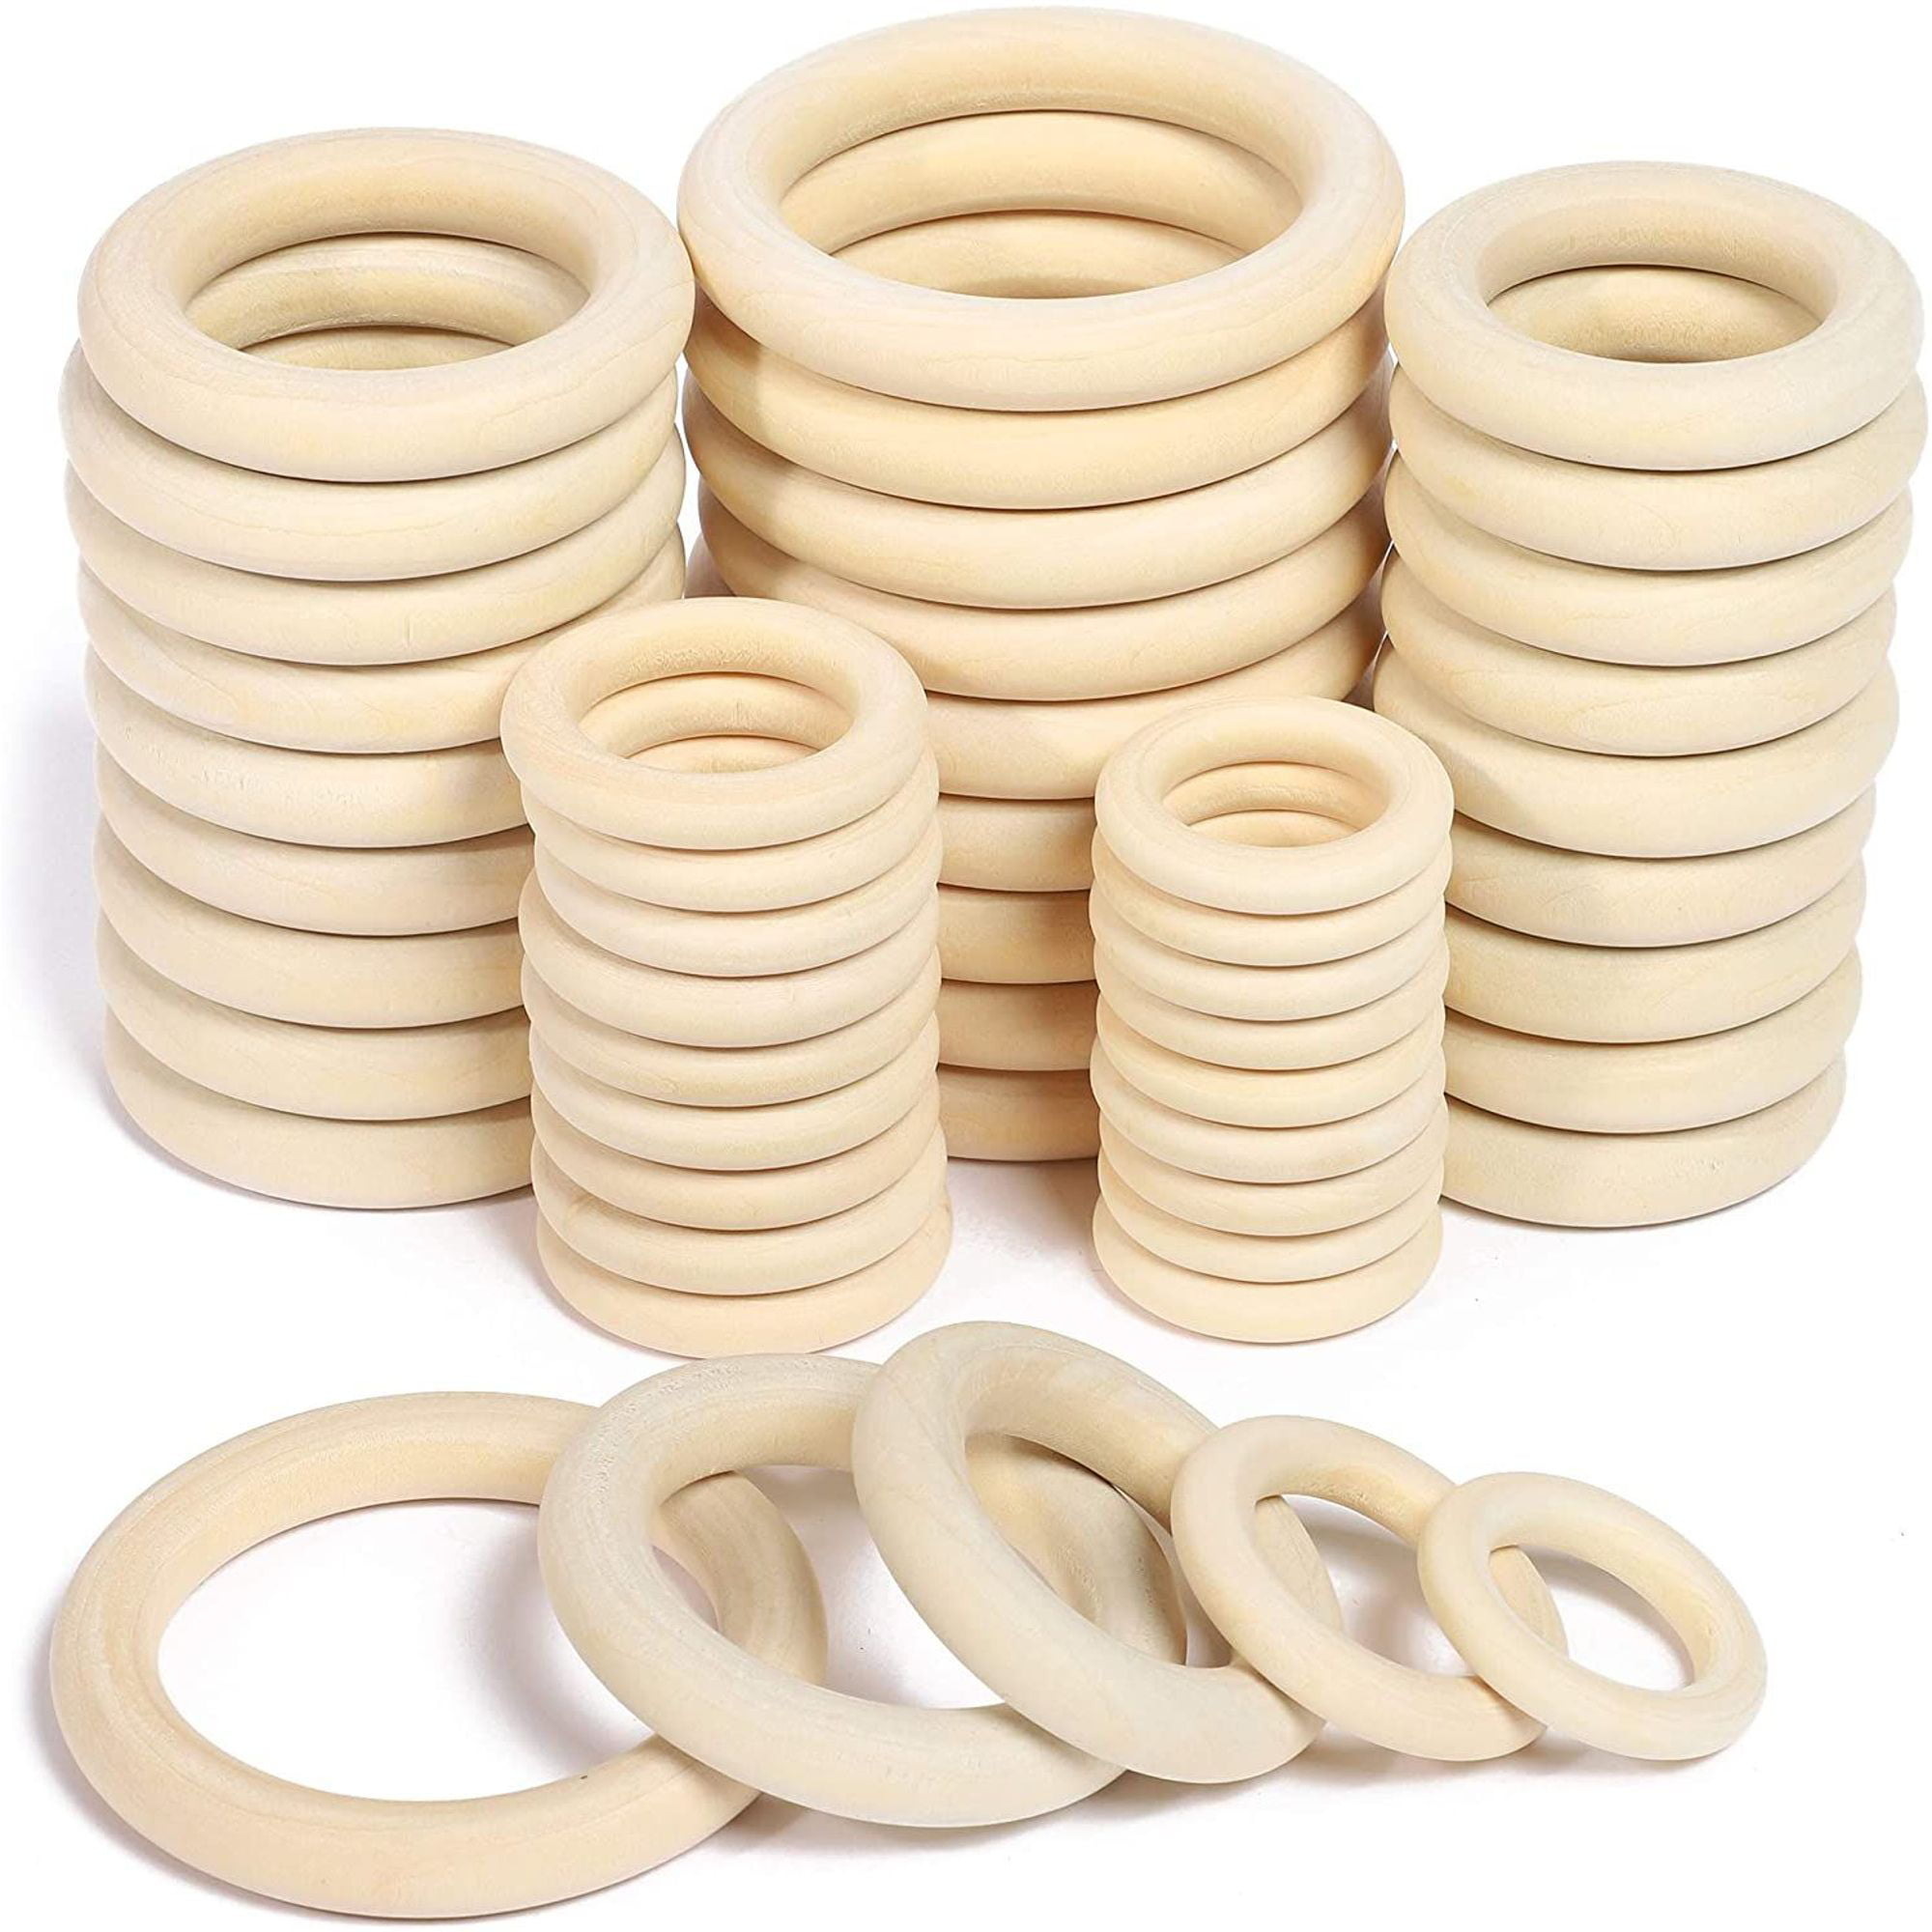 50 Pcs Unfinished Natural Wooden Rings for DIY Craft, Jewelry Making